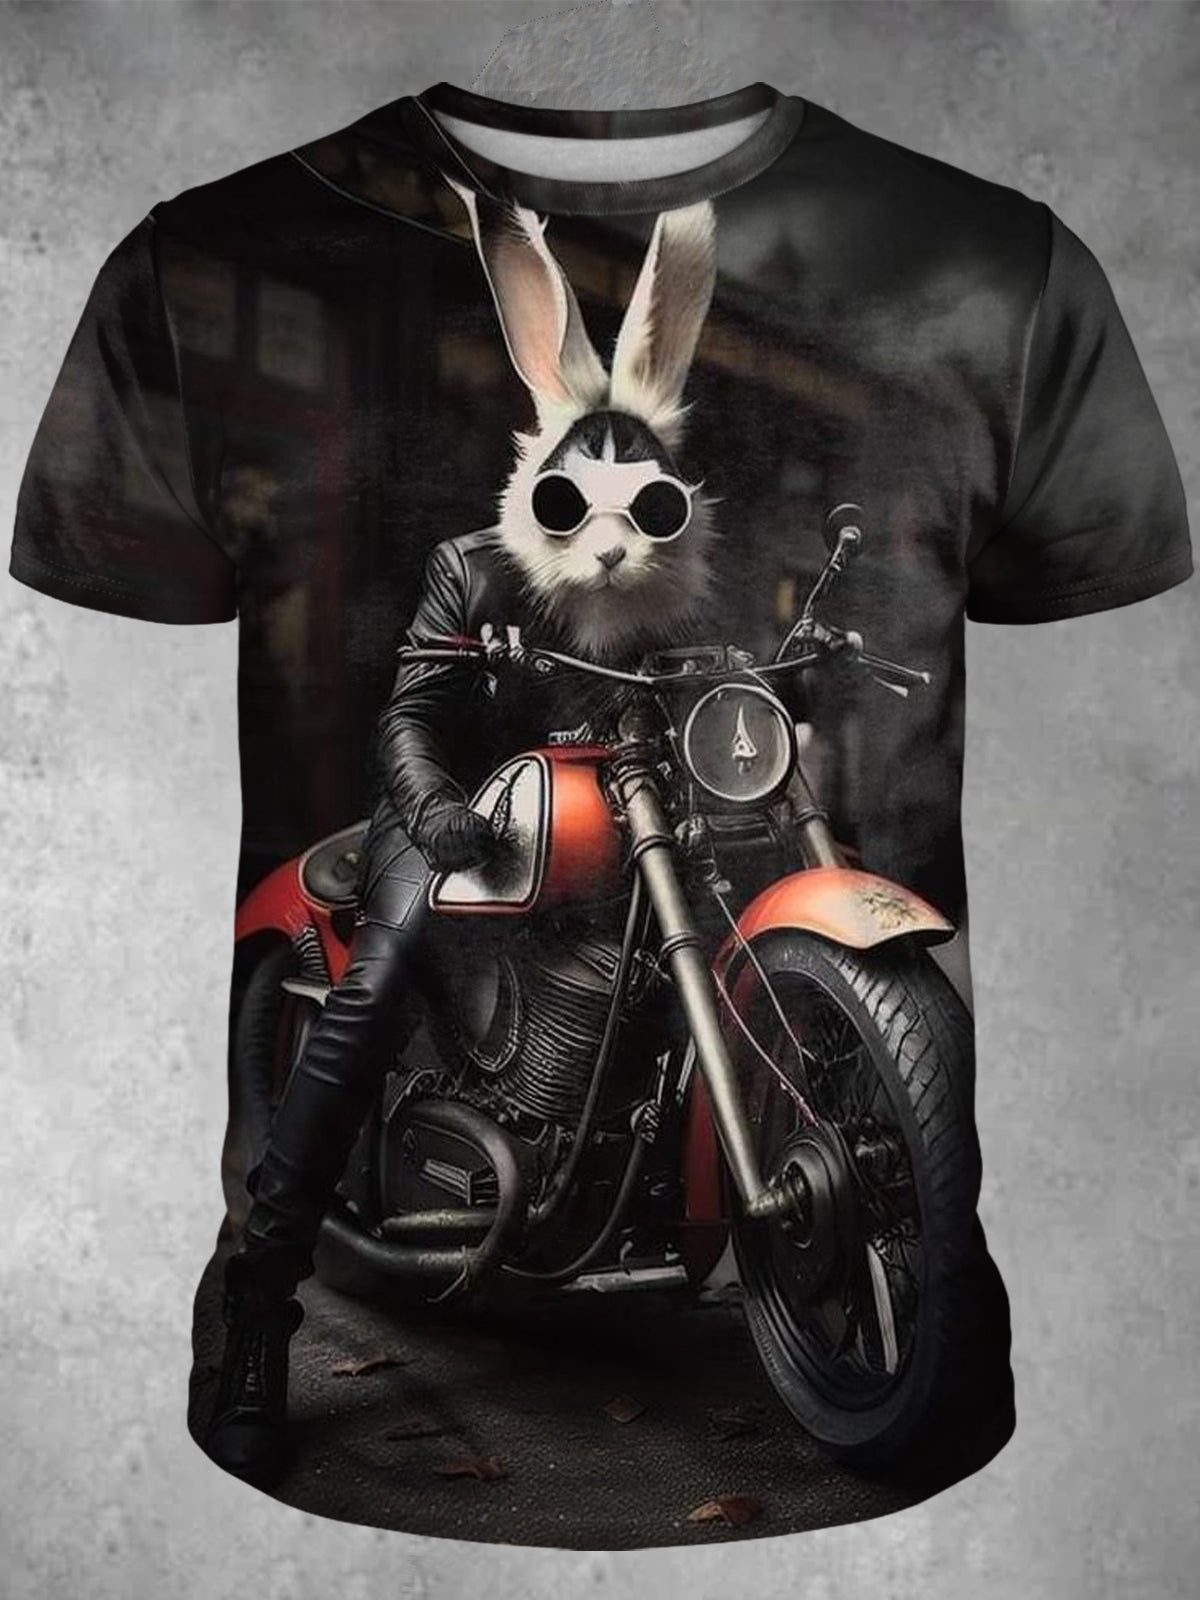 Personalized Rabbit Motorcycle Print Round Neck Short-Sleeved Men's T-Shirt